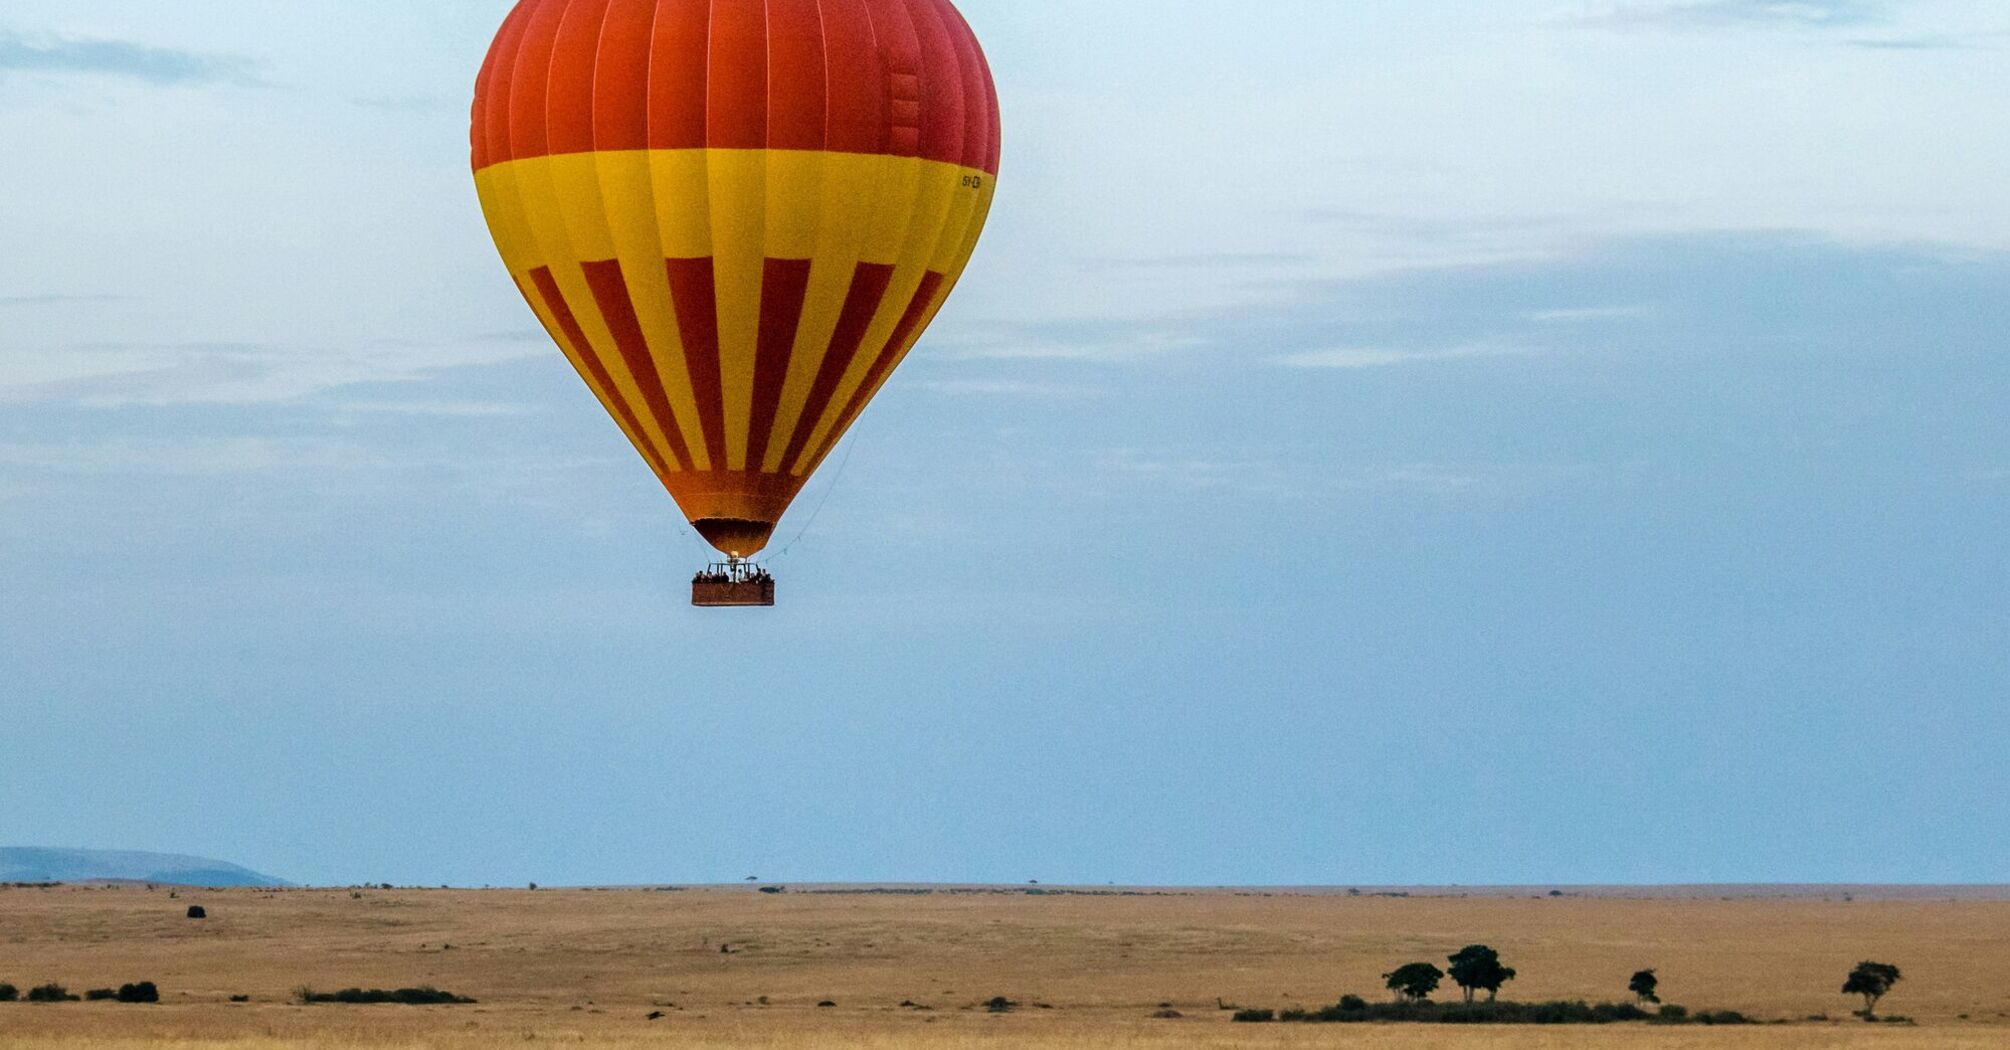 A lone hot air balloon over a herd of zebras.